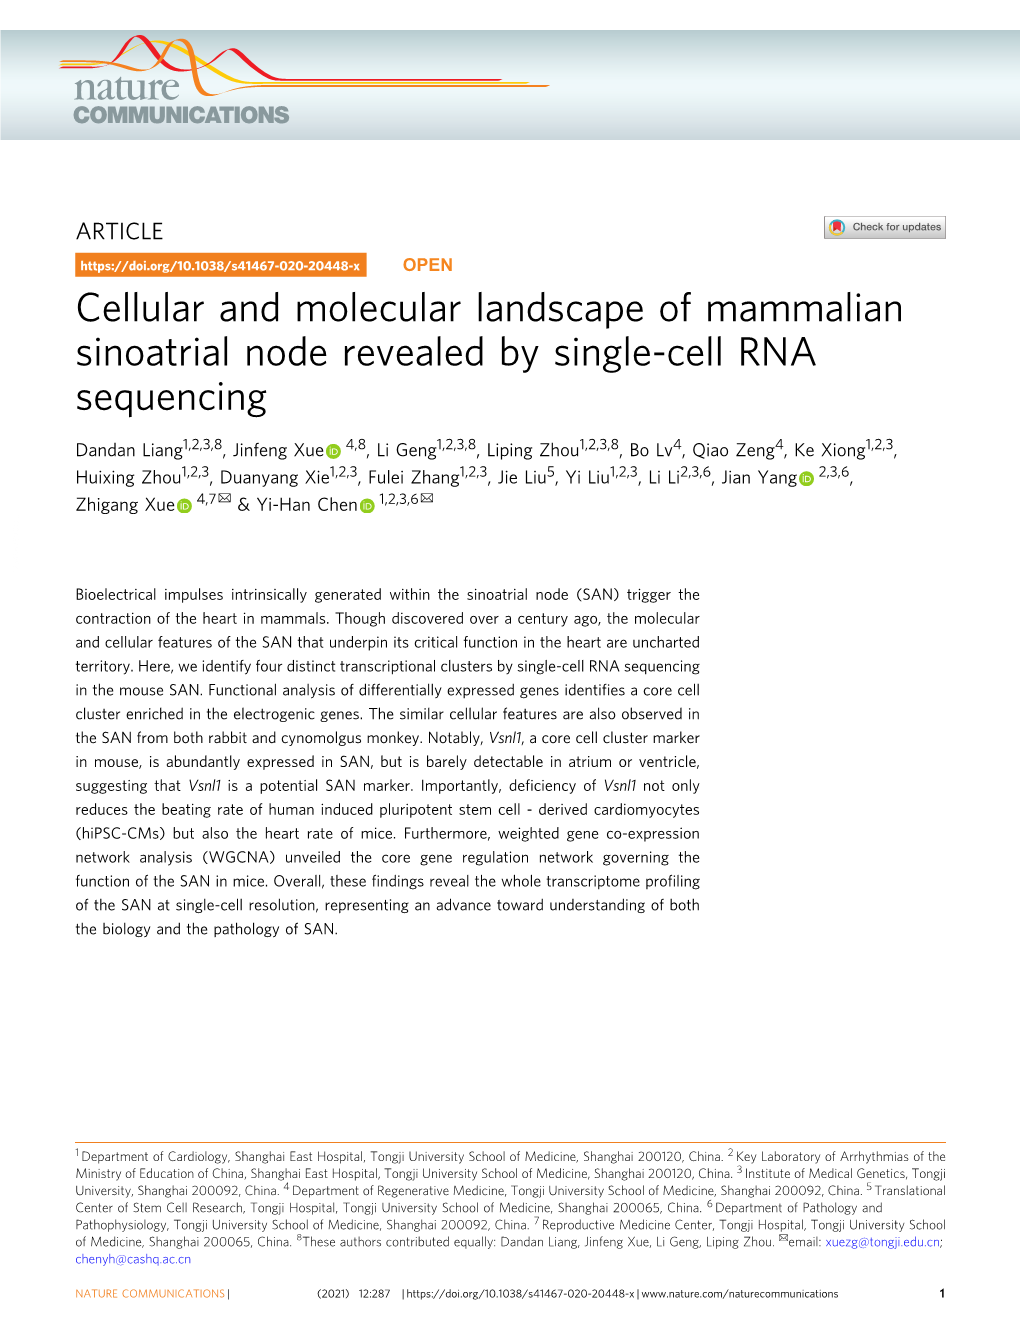 Cellular and Molecular Landscape of Mammalian Sinoatrial Node Revealed by Single-Cell RNA Sequencing